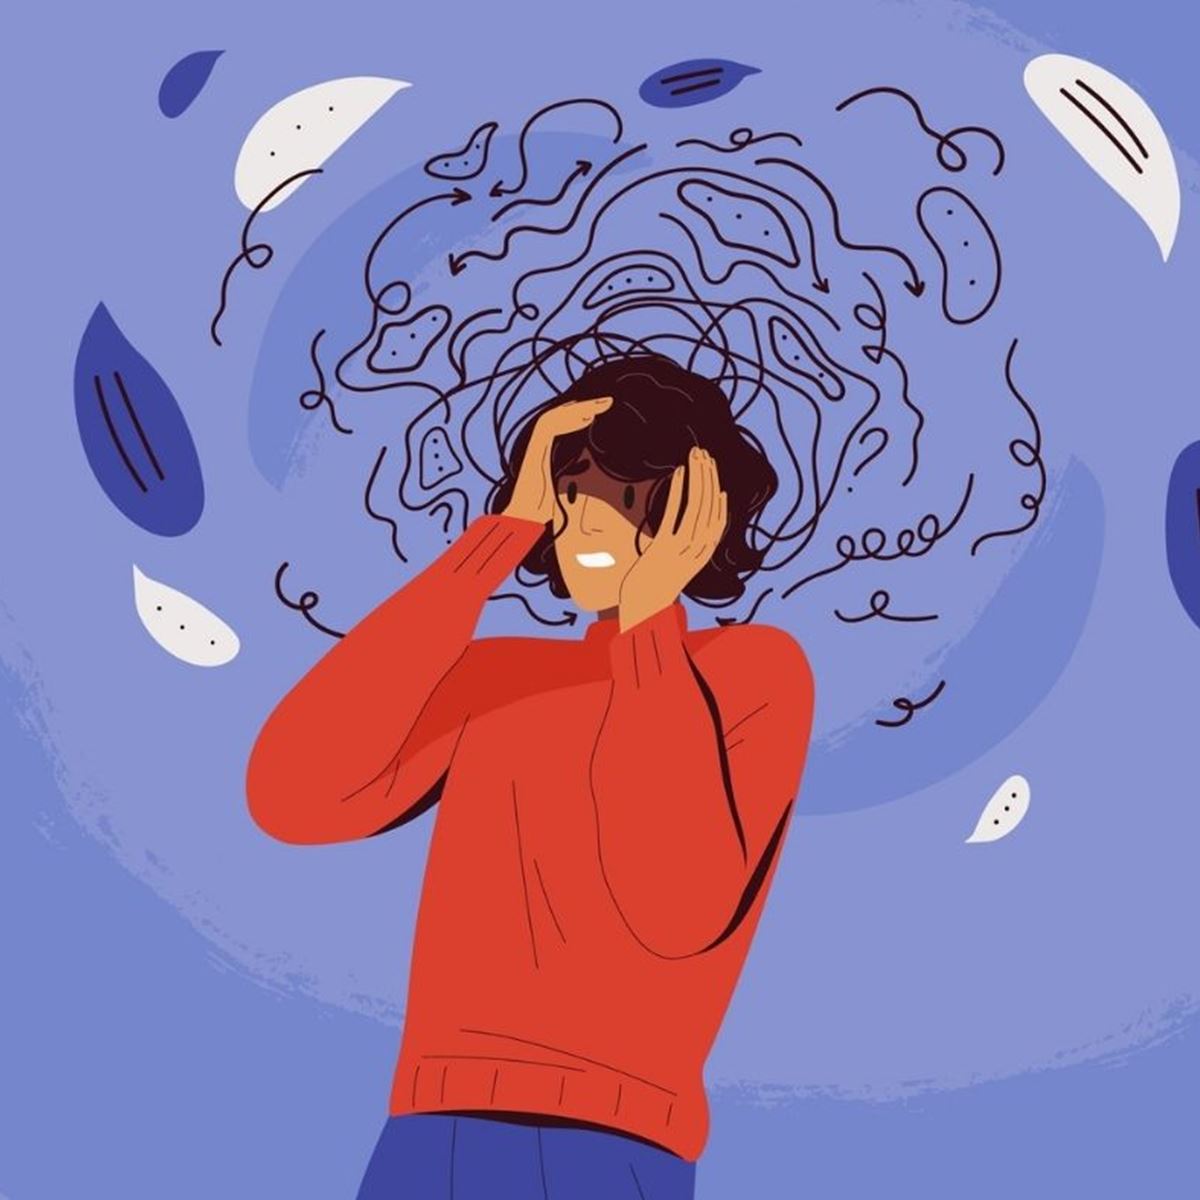 5 Tips To Deal With Anxiety At School (For Teens)